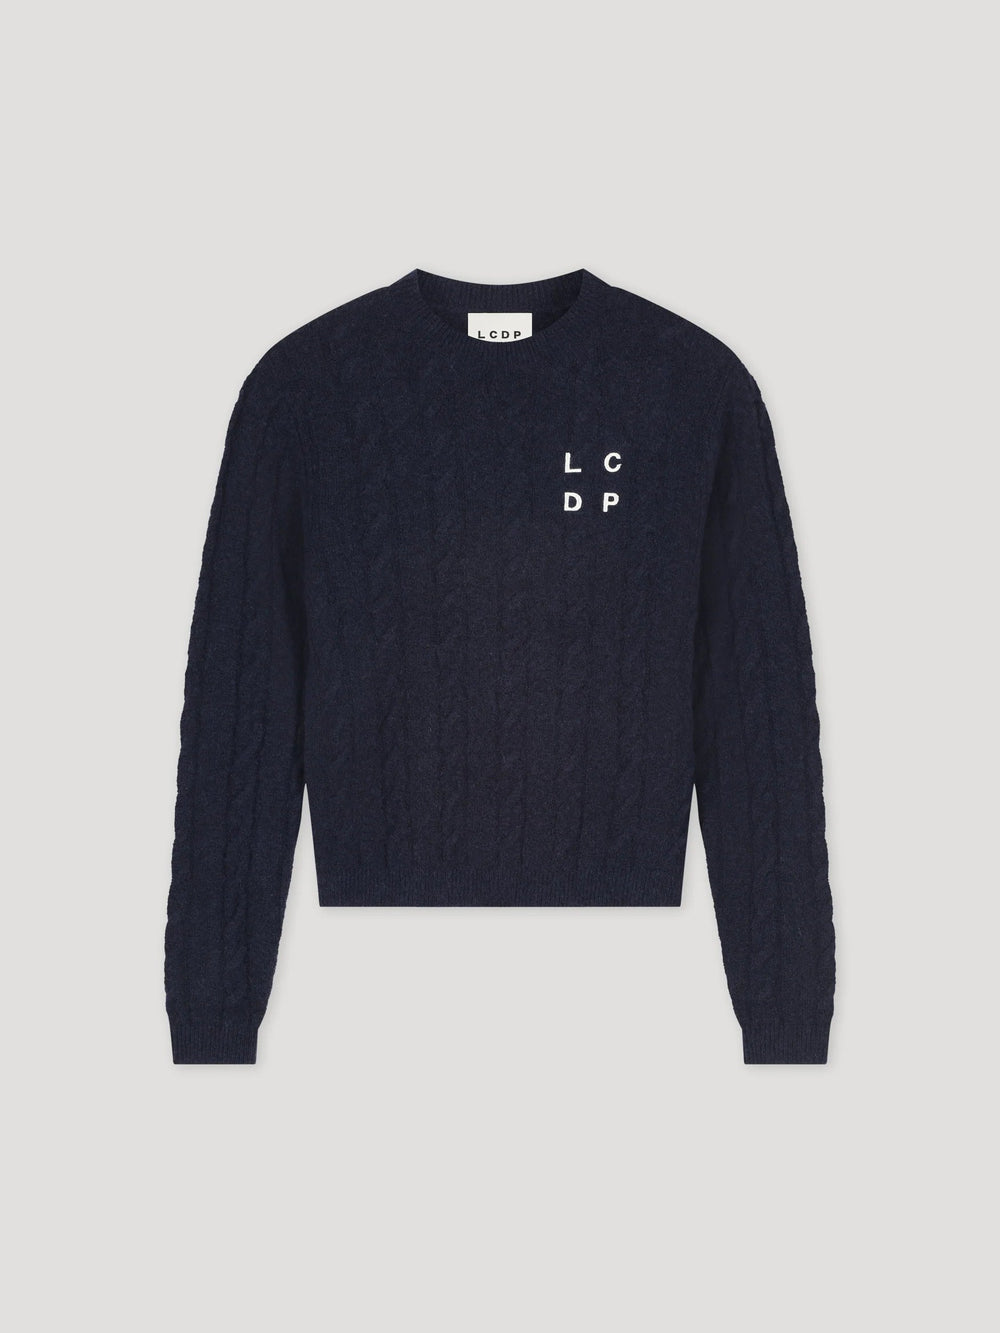 Classic Embroidery Artwork Pullover - Navy - Posh New York